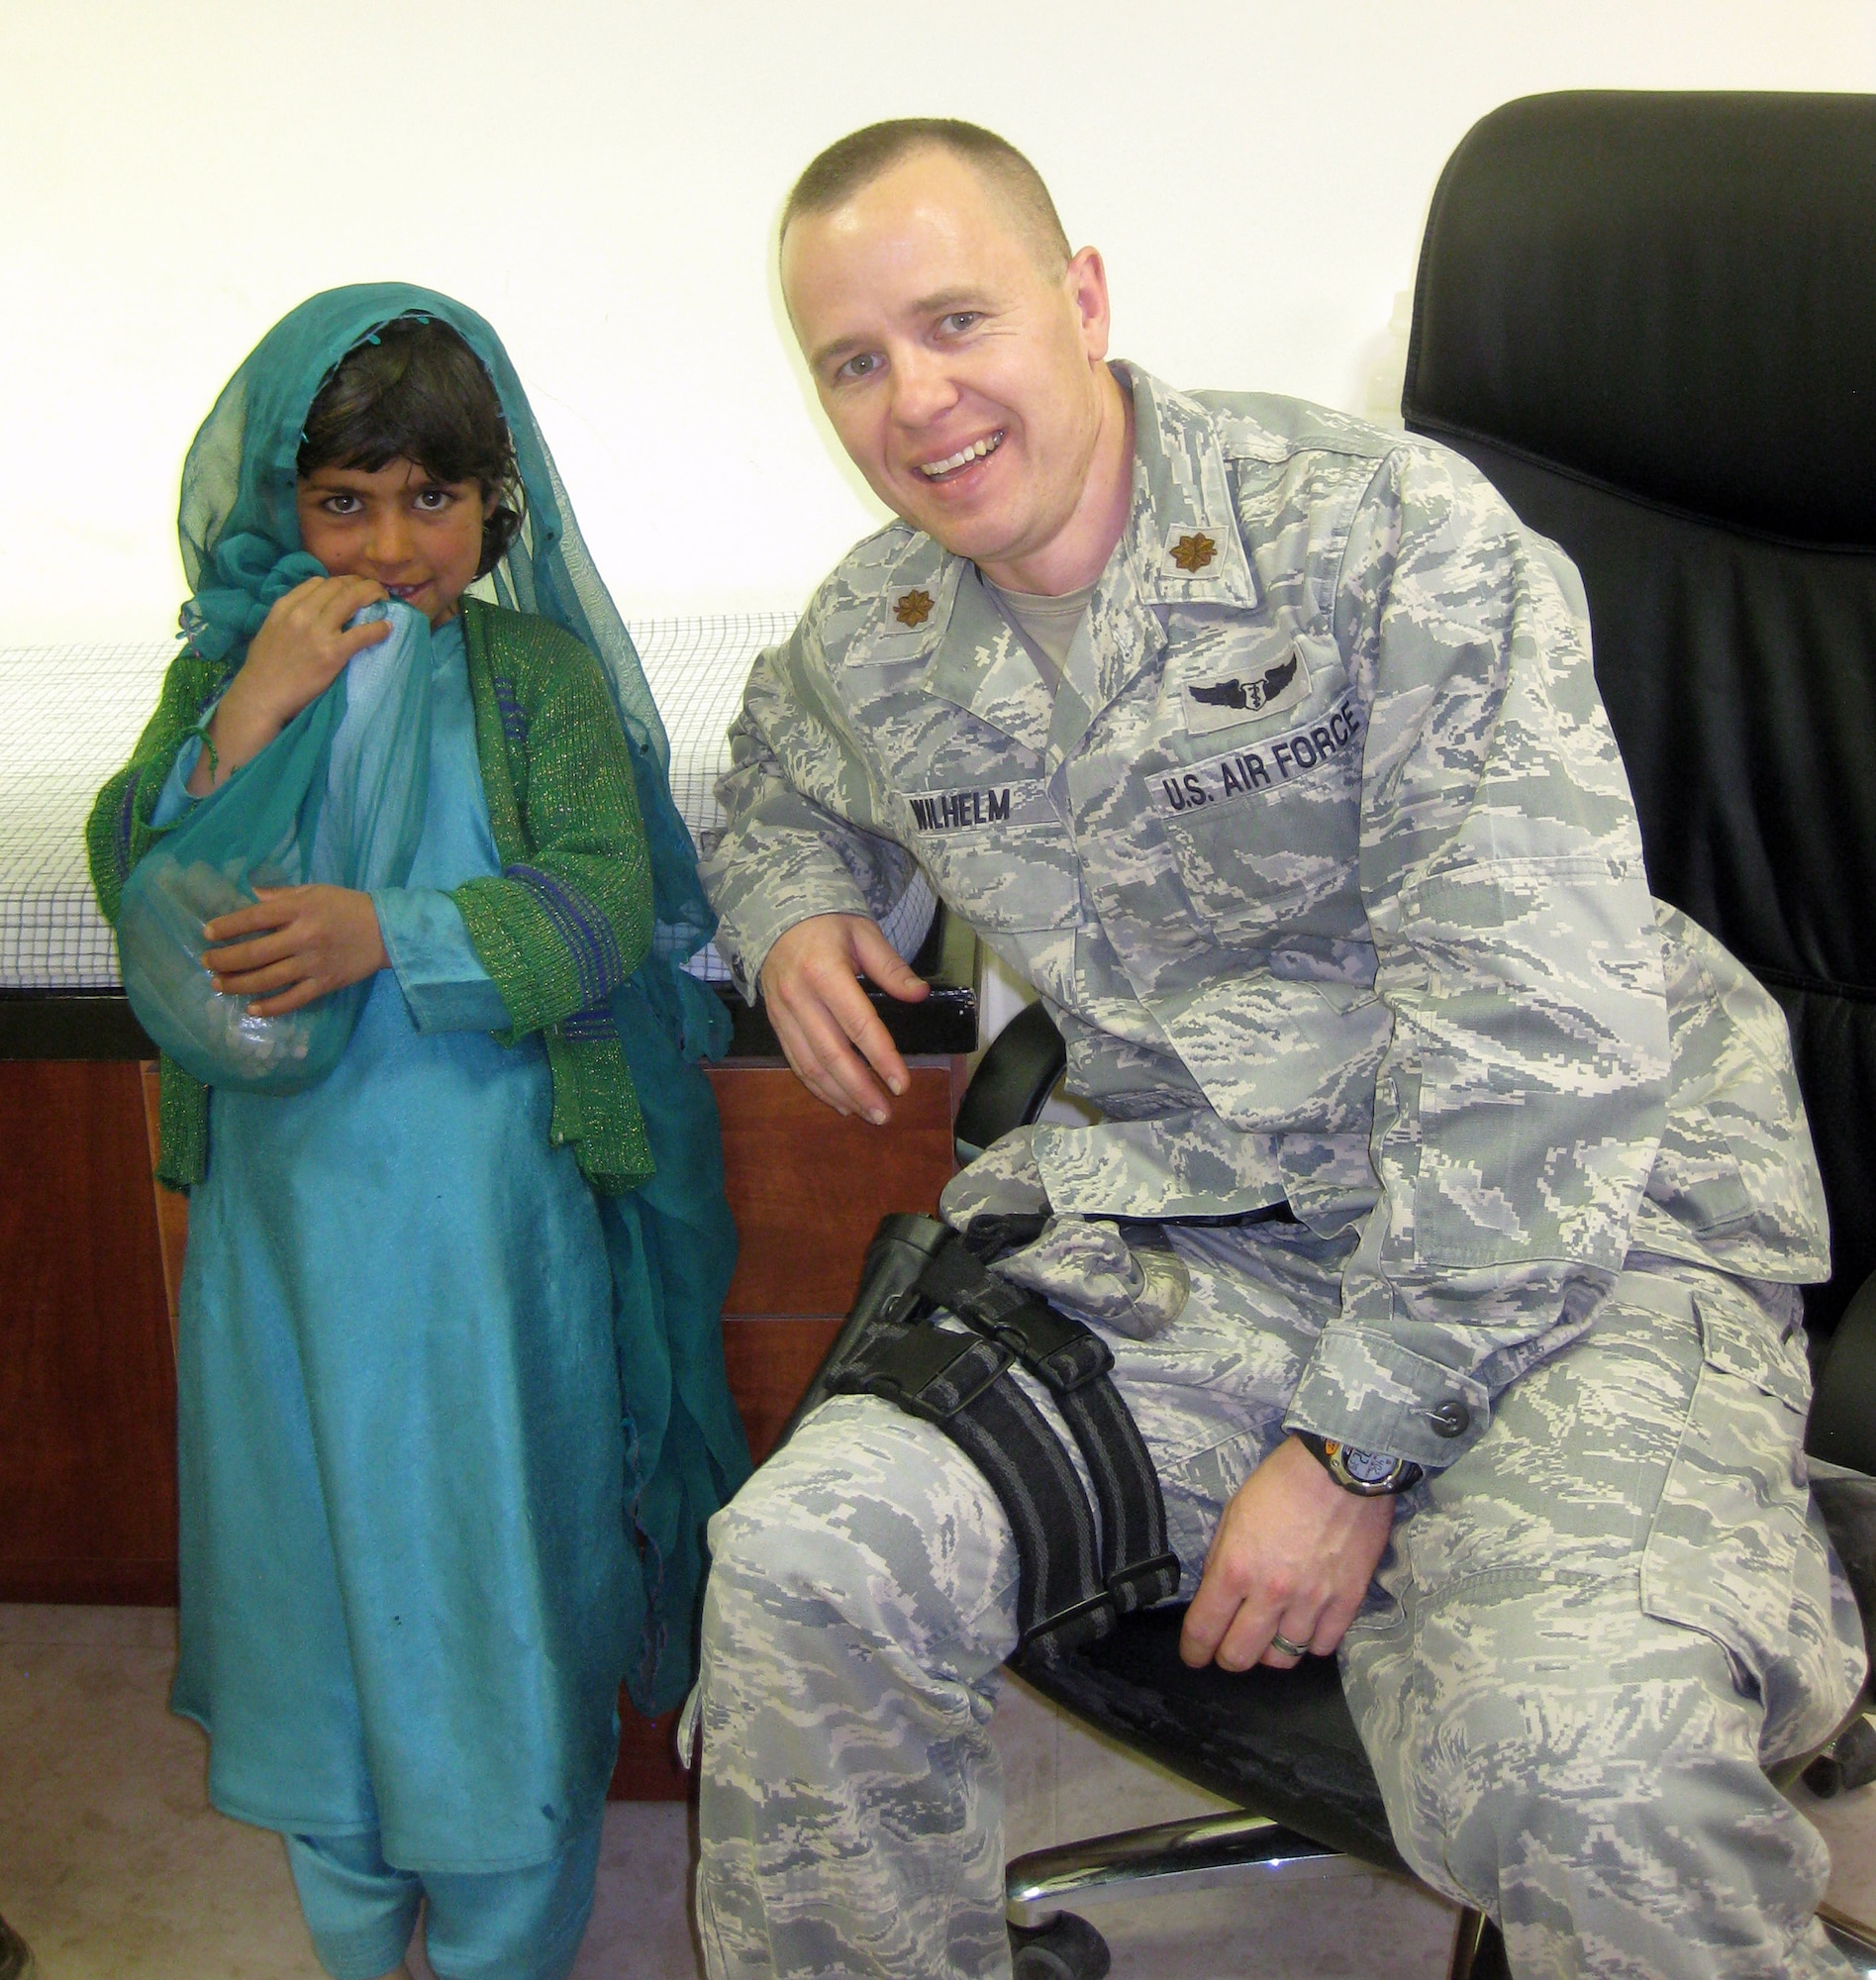 AFGHANISTAN  -- Dr. (Maj.) Christopher Wilhelm takes a photo with an 8-year-old girl he cared for during his deployment to Afghanistan April 2. Maj. Wilhelm was deployed from December 2011 to June 2012. (Courtesy photo)